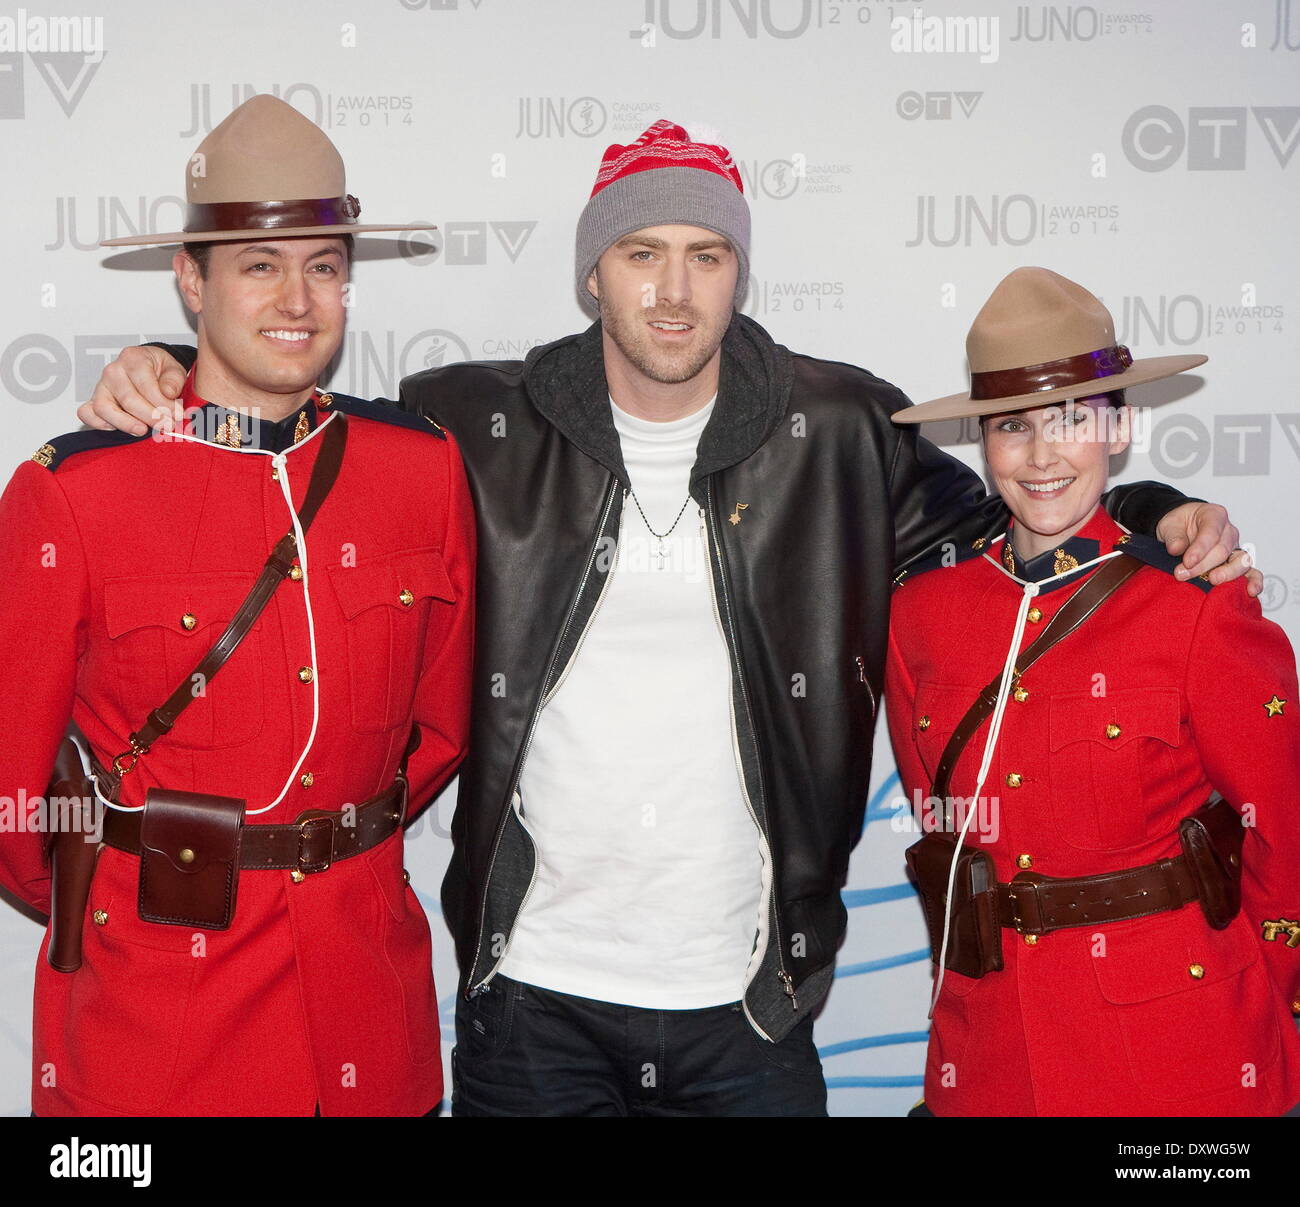 Winnipeg, Manitoba, Canada. 30th Mar, 2014. Classified arrives on the Red Carpet at the 2014 Juno Awards at the MTS Centre. © Heinz Ruckemann/ZUMA Wire/ZUMAPRESS.com/Alamy Live News Stock Photo